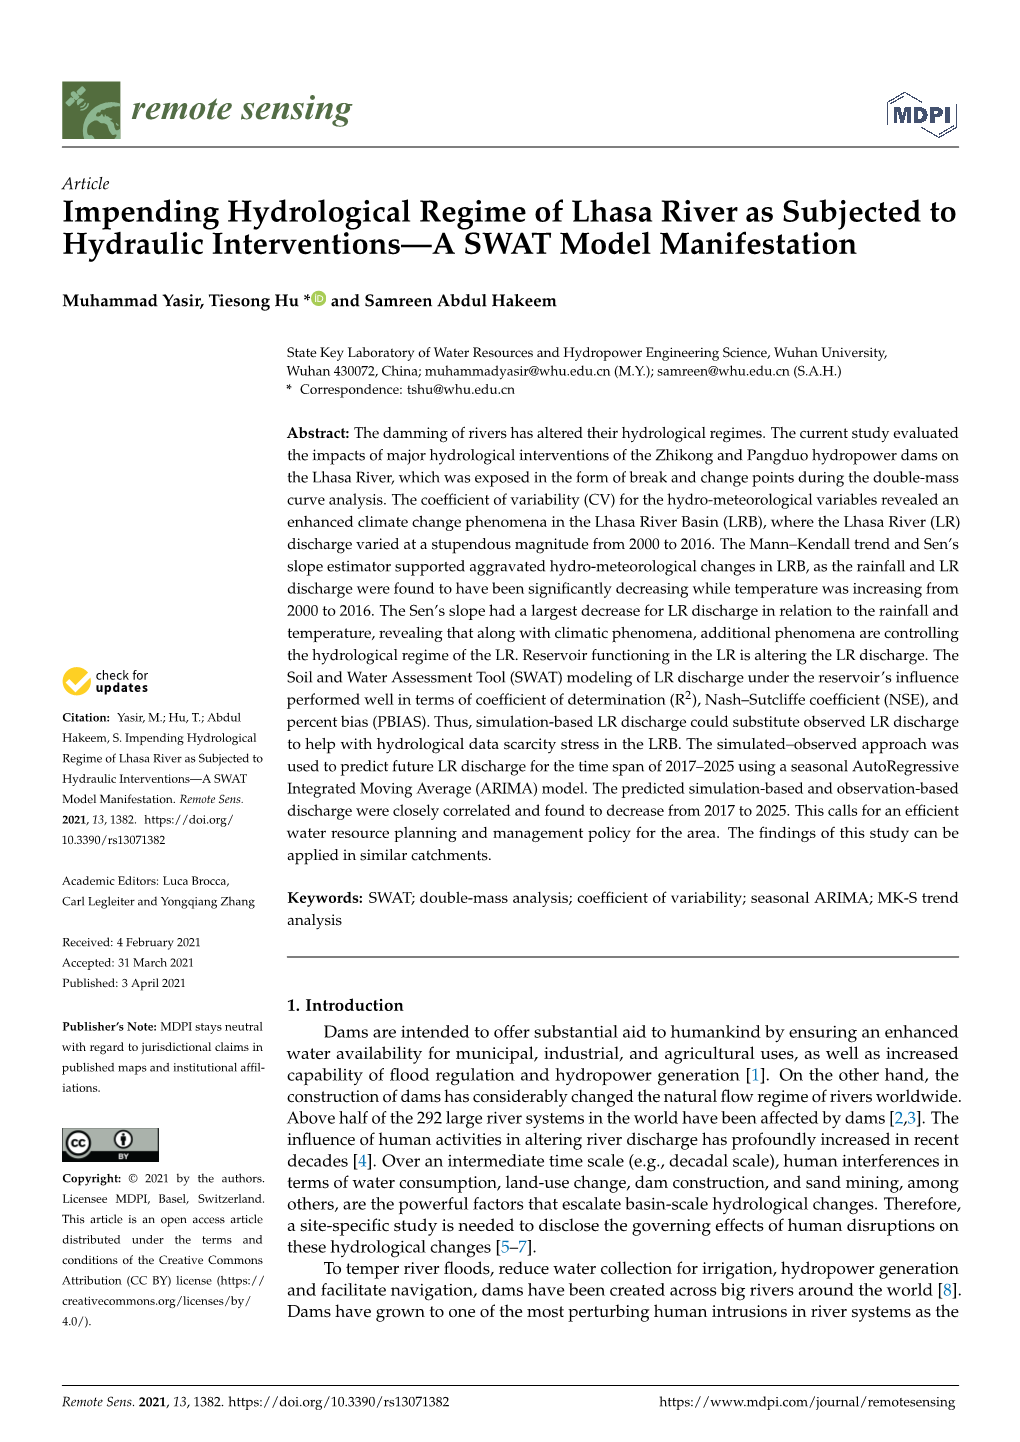 Impending Hydrological Regime of Lhasa River As Subjected to Hydraulic Interventions—A SWAT Model Manifestation